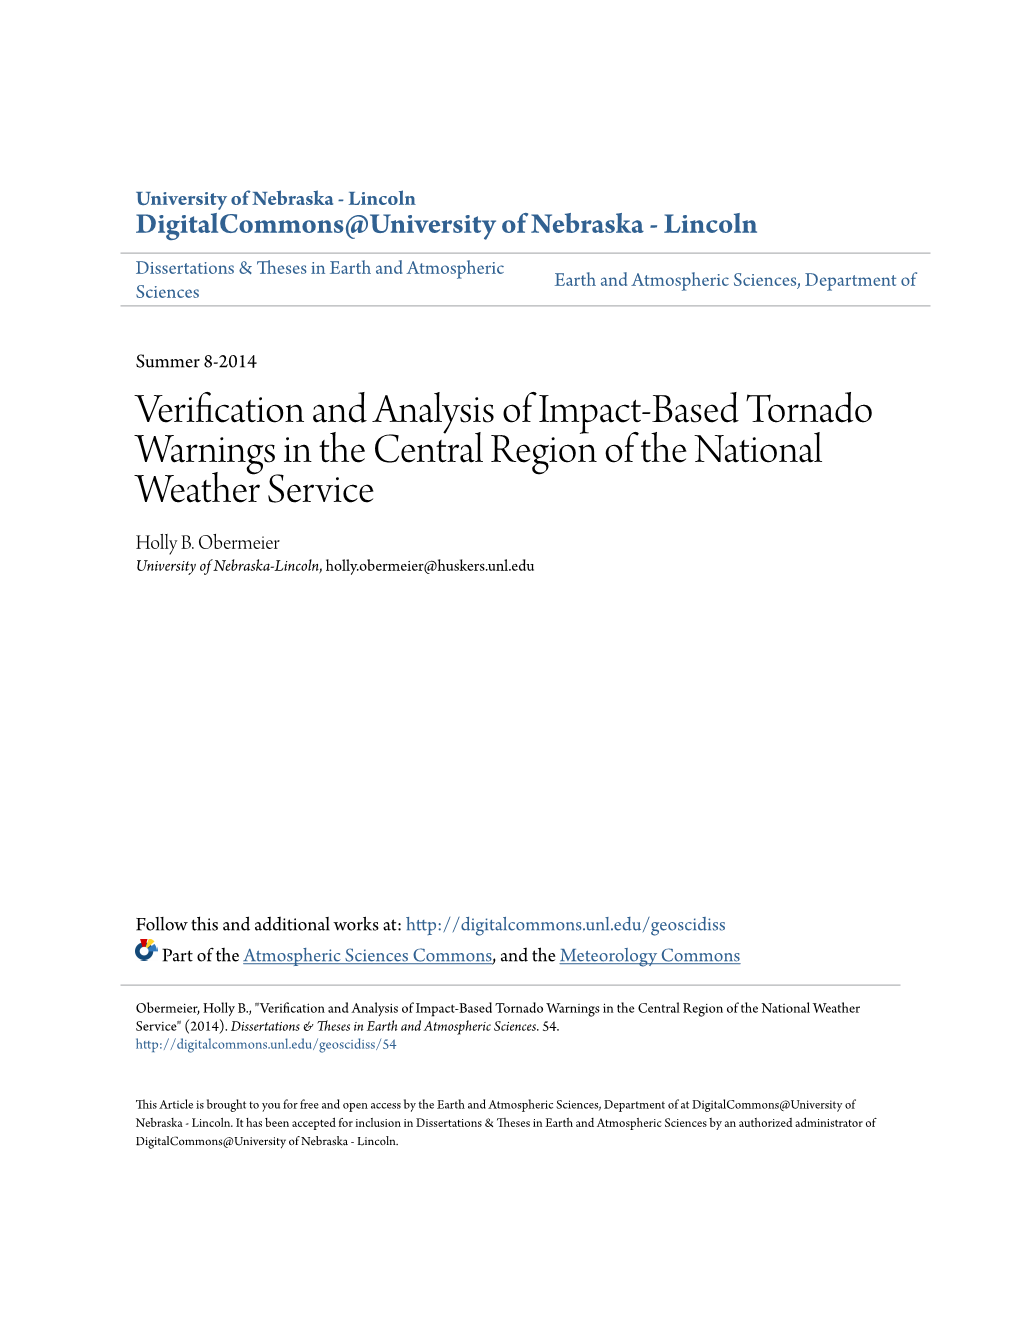 Verification and Analysis of Impact-Based Tornado Warnings in the Central Region of the National Weather Service Holly B